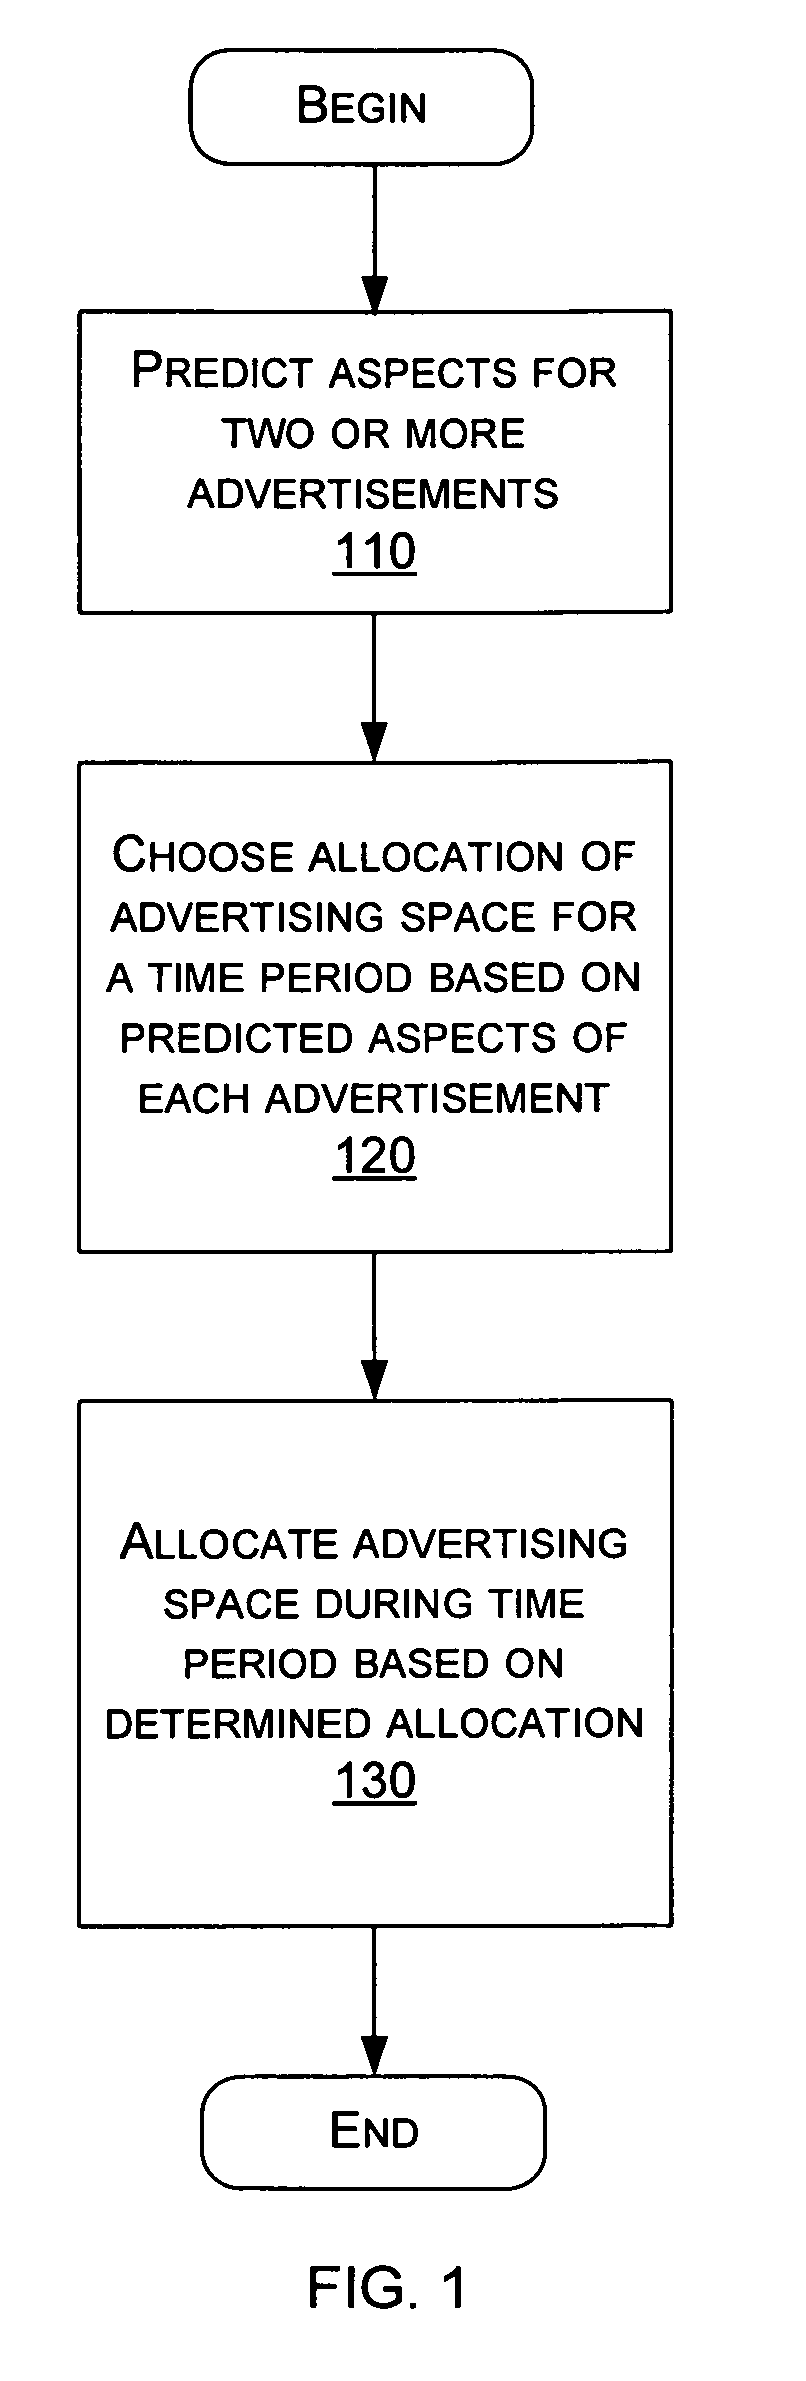 System identification, estimation, and prediction of advertising-related data